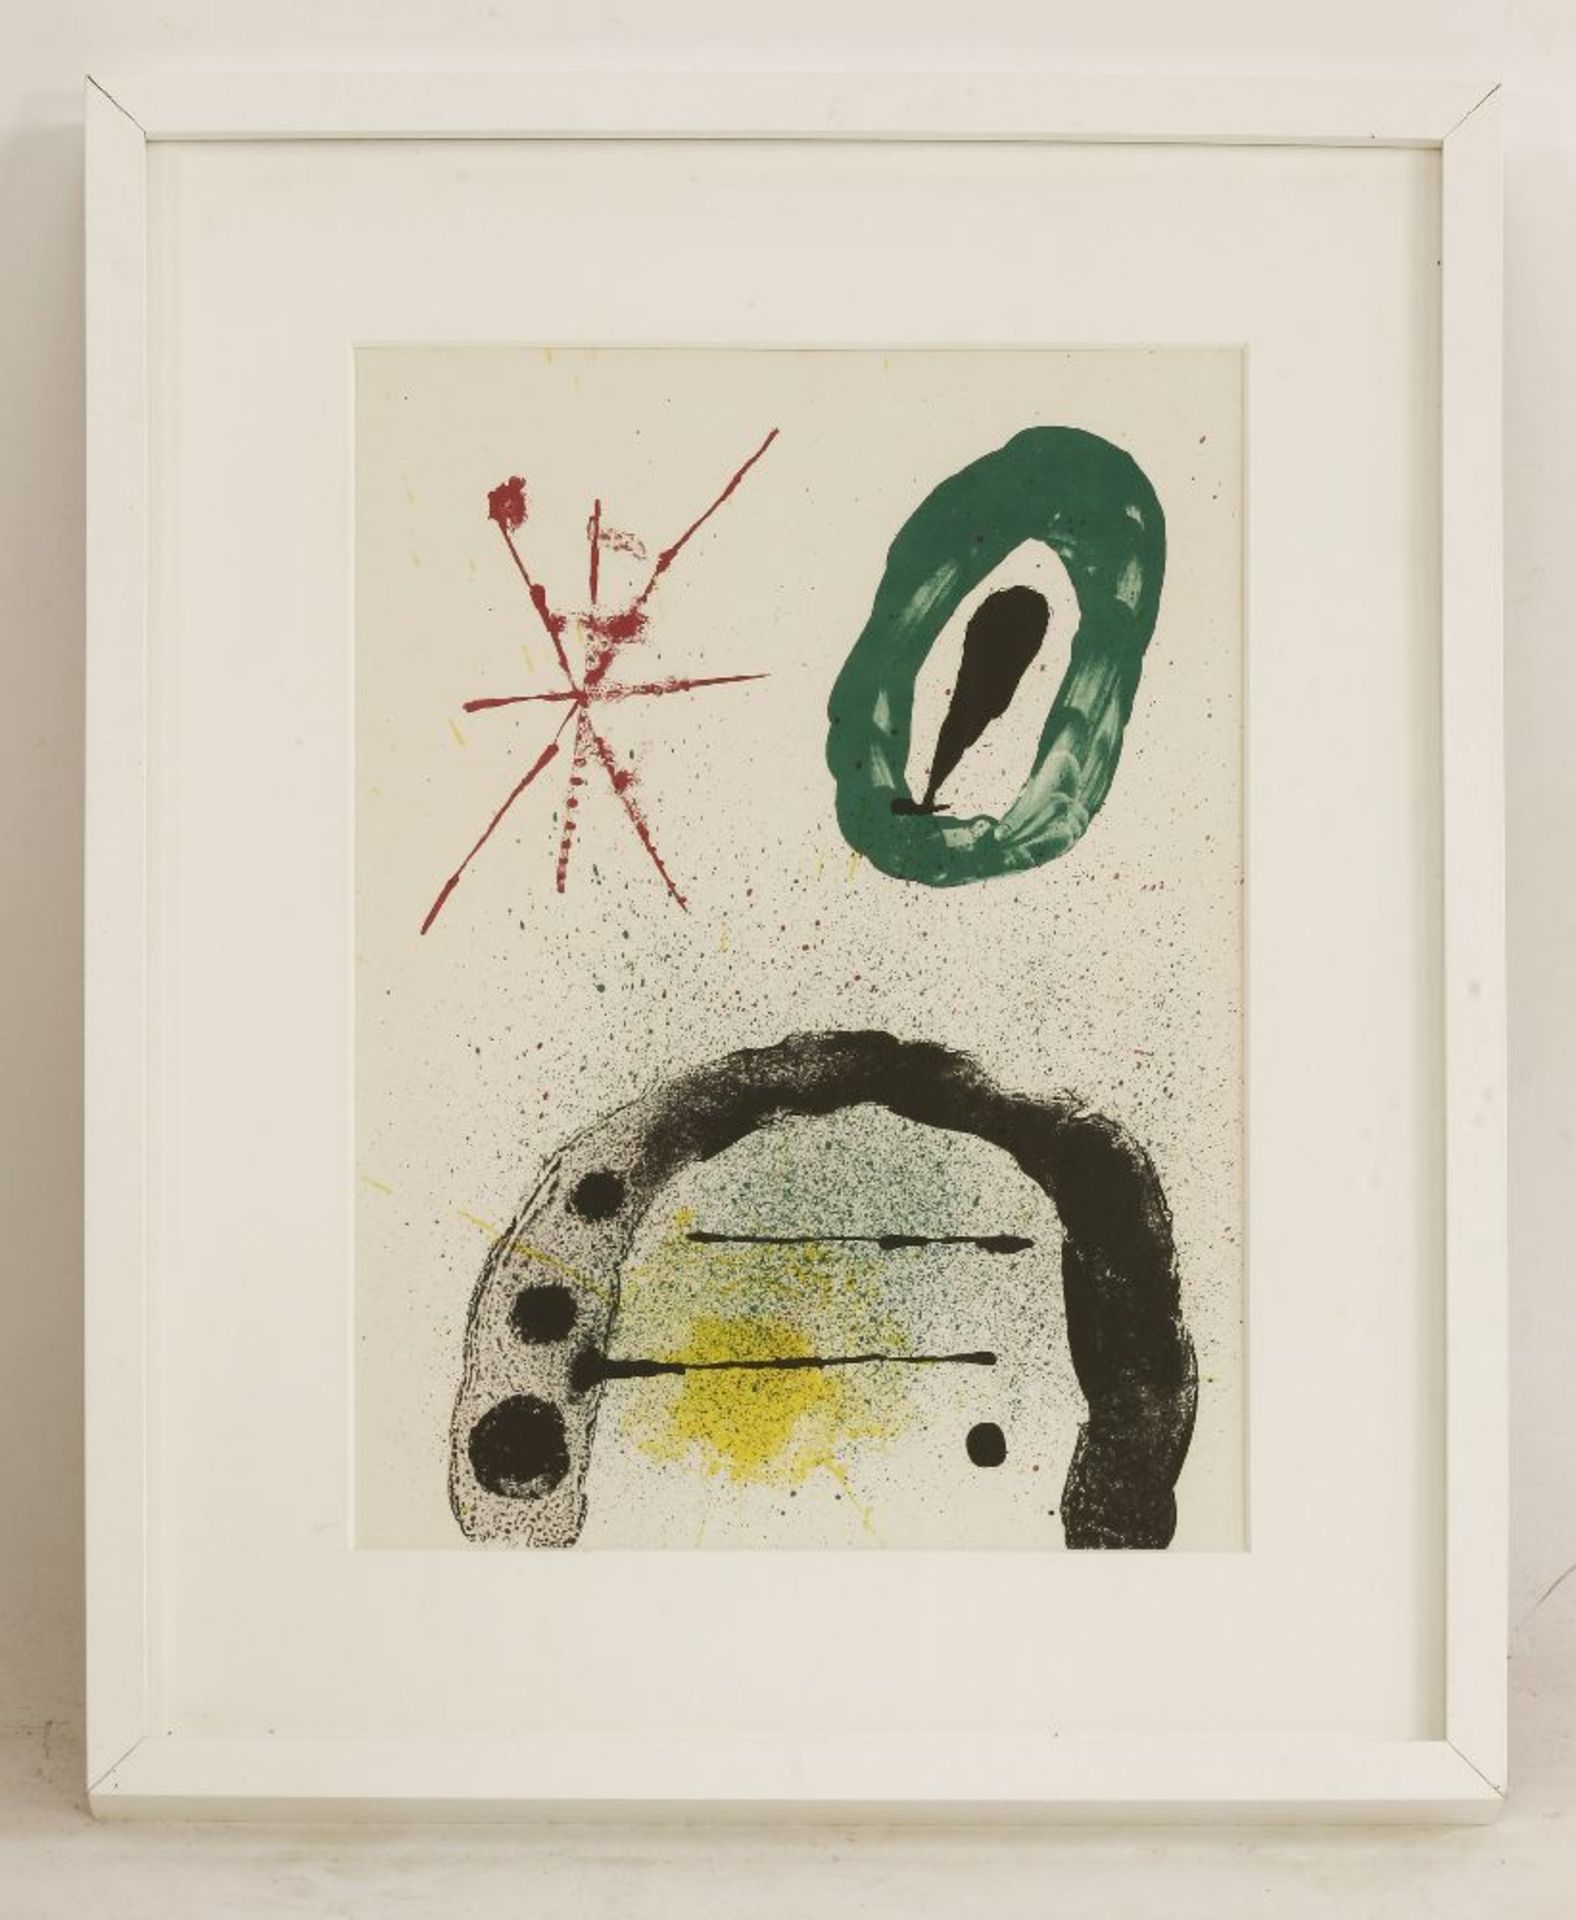 *After Joan Miro (Spanish, 1893-1983)FROM DERRIERE LE MIROIR Lithograph, number 139-140, 1963, - Image 2 of 2